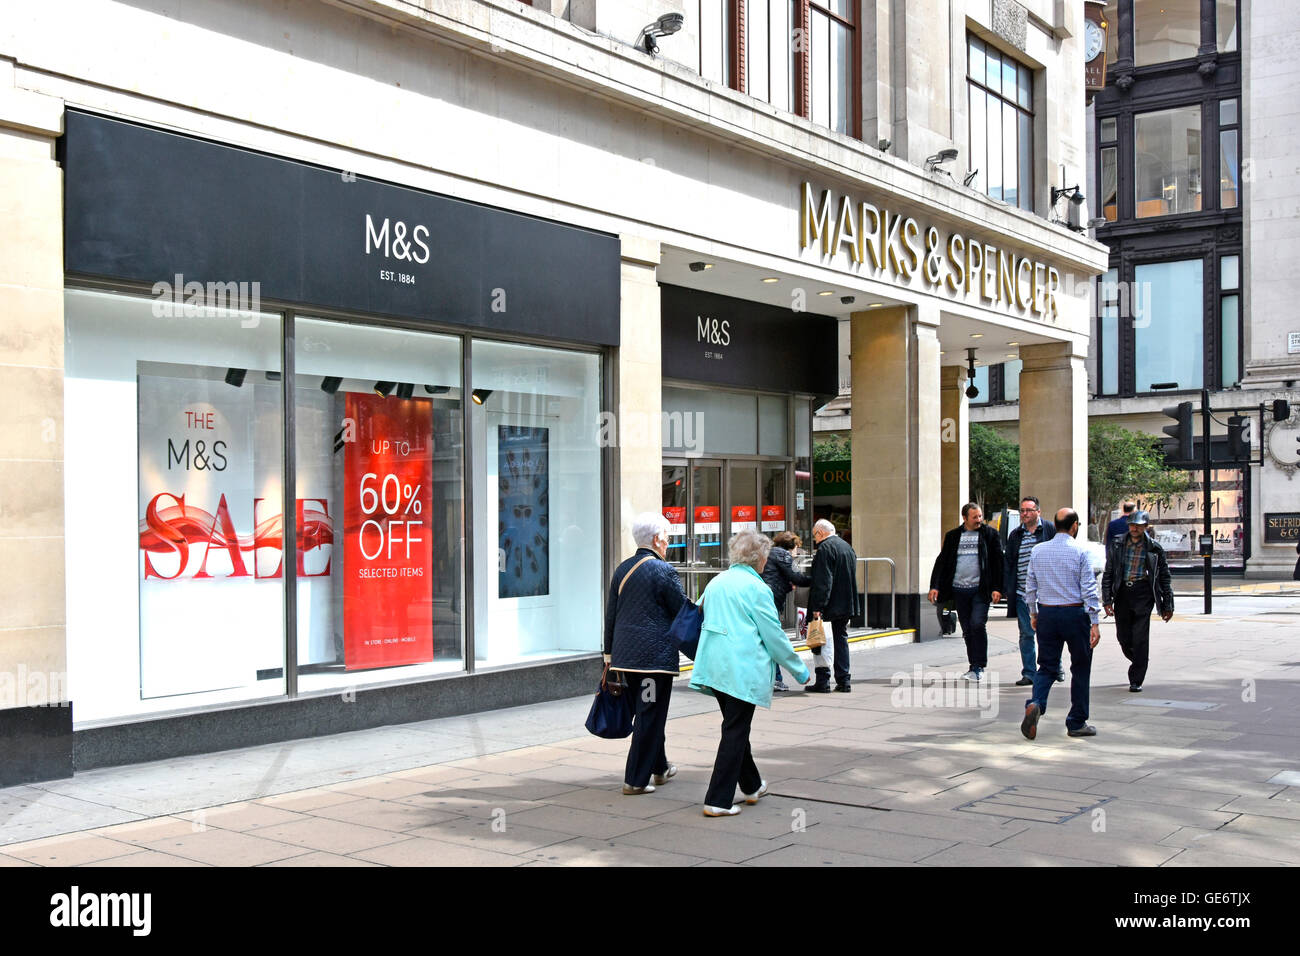 Oxford Street shopping mecca with shop front windows and wide pavement of Marks and Spencer London West End flagship M&S store in London England UK Stock Photo